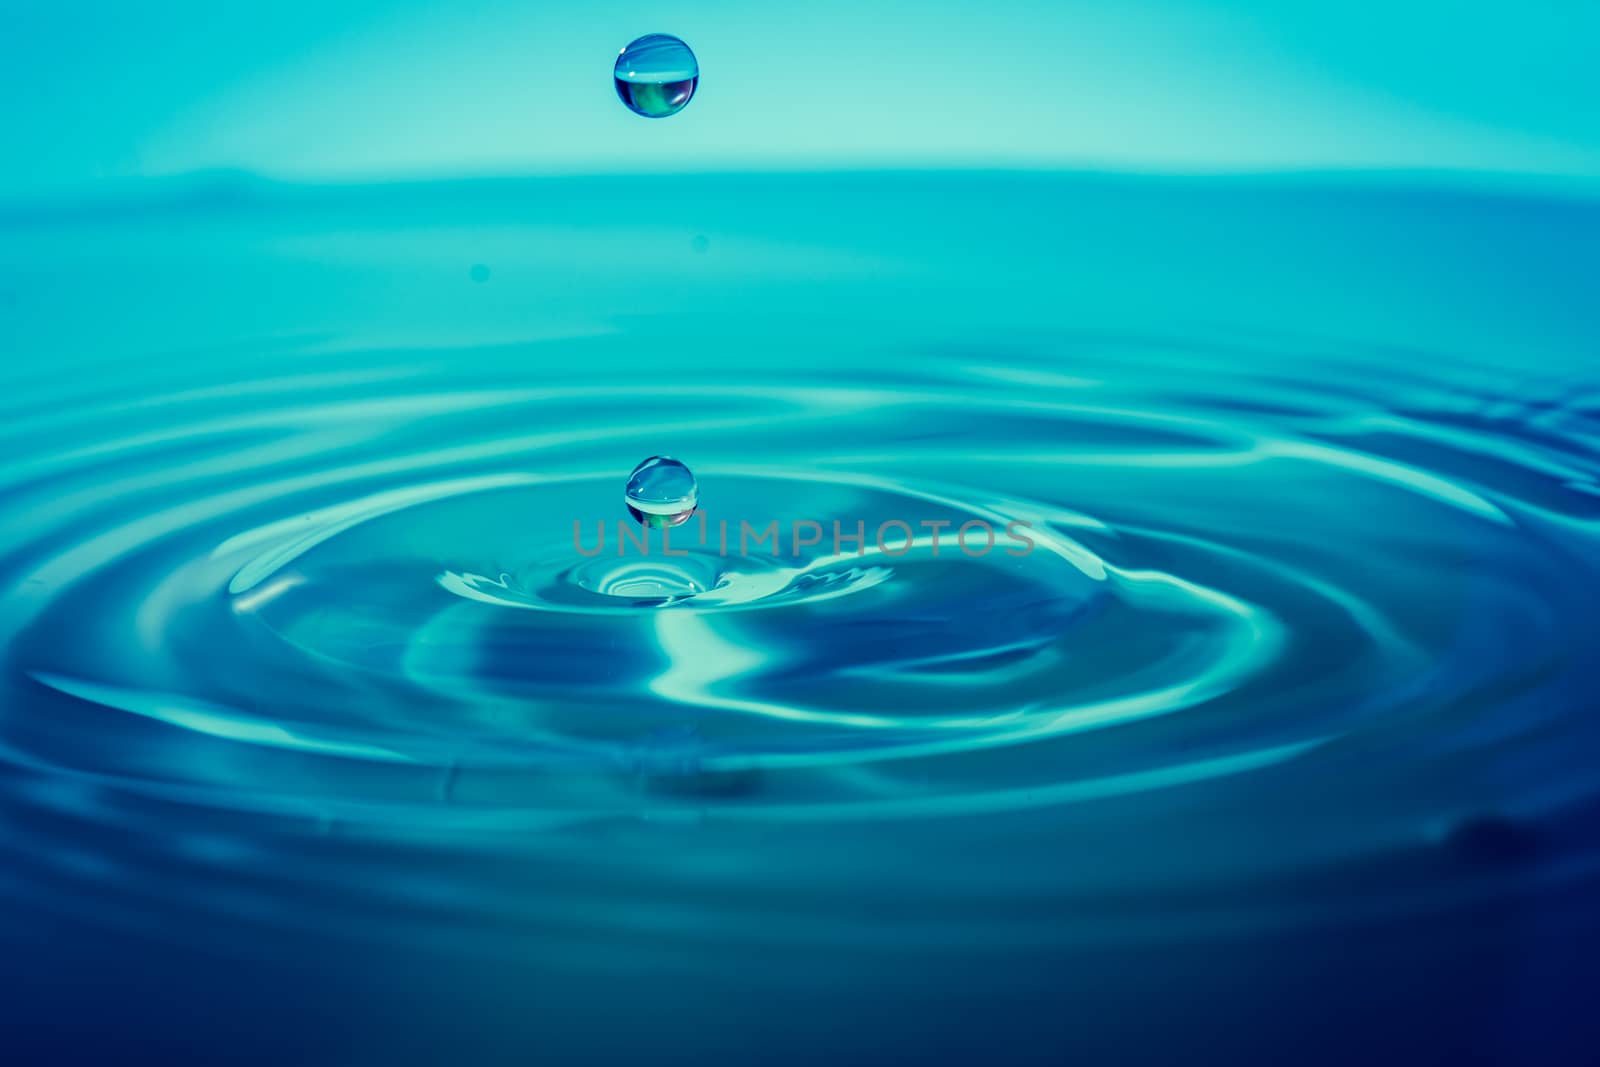 Impact instant of a drop of water by IVYPHOTOS